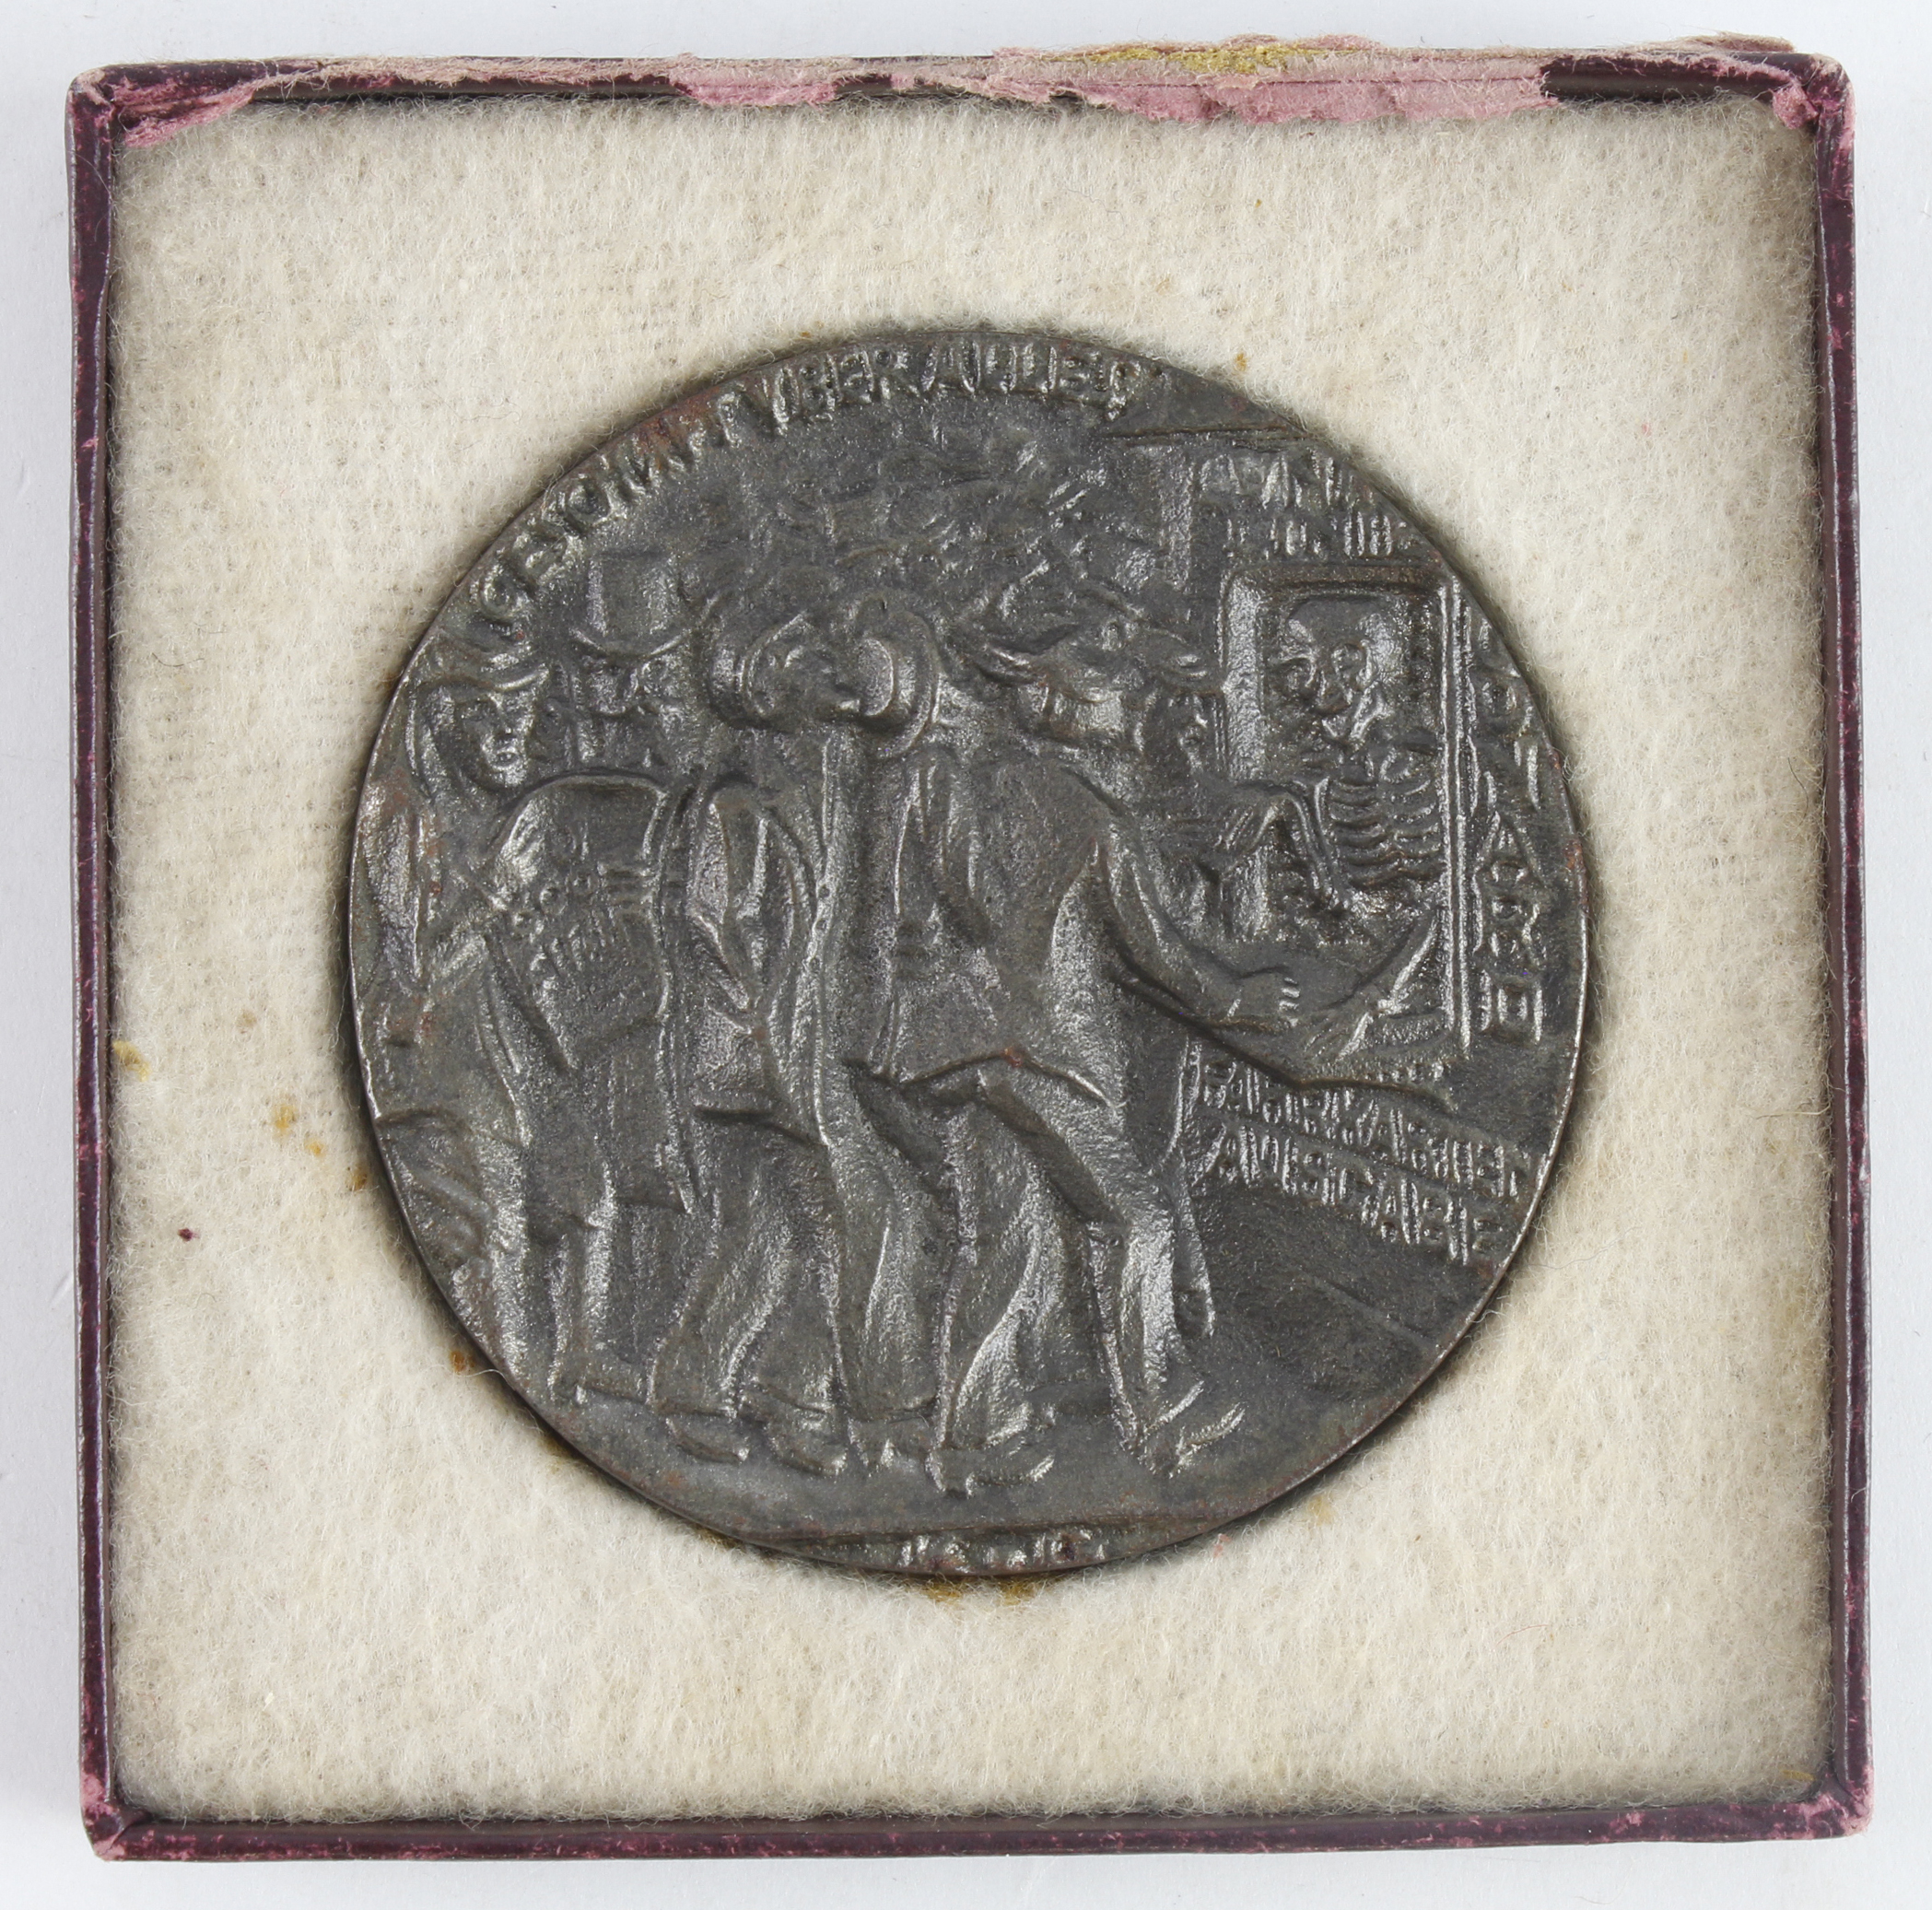 WW1 Lusitania medallion British type in box minted to commemorate the ships sinking by a German - Image 2 of 2